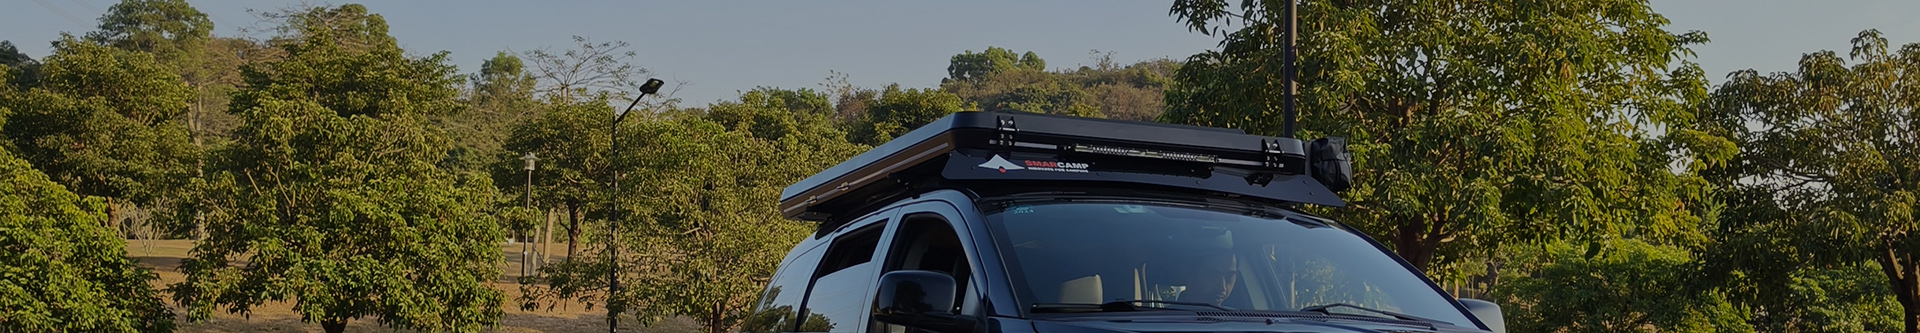 SmarCamp Rooftop Tent: The New Trendsetter in Camping